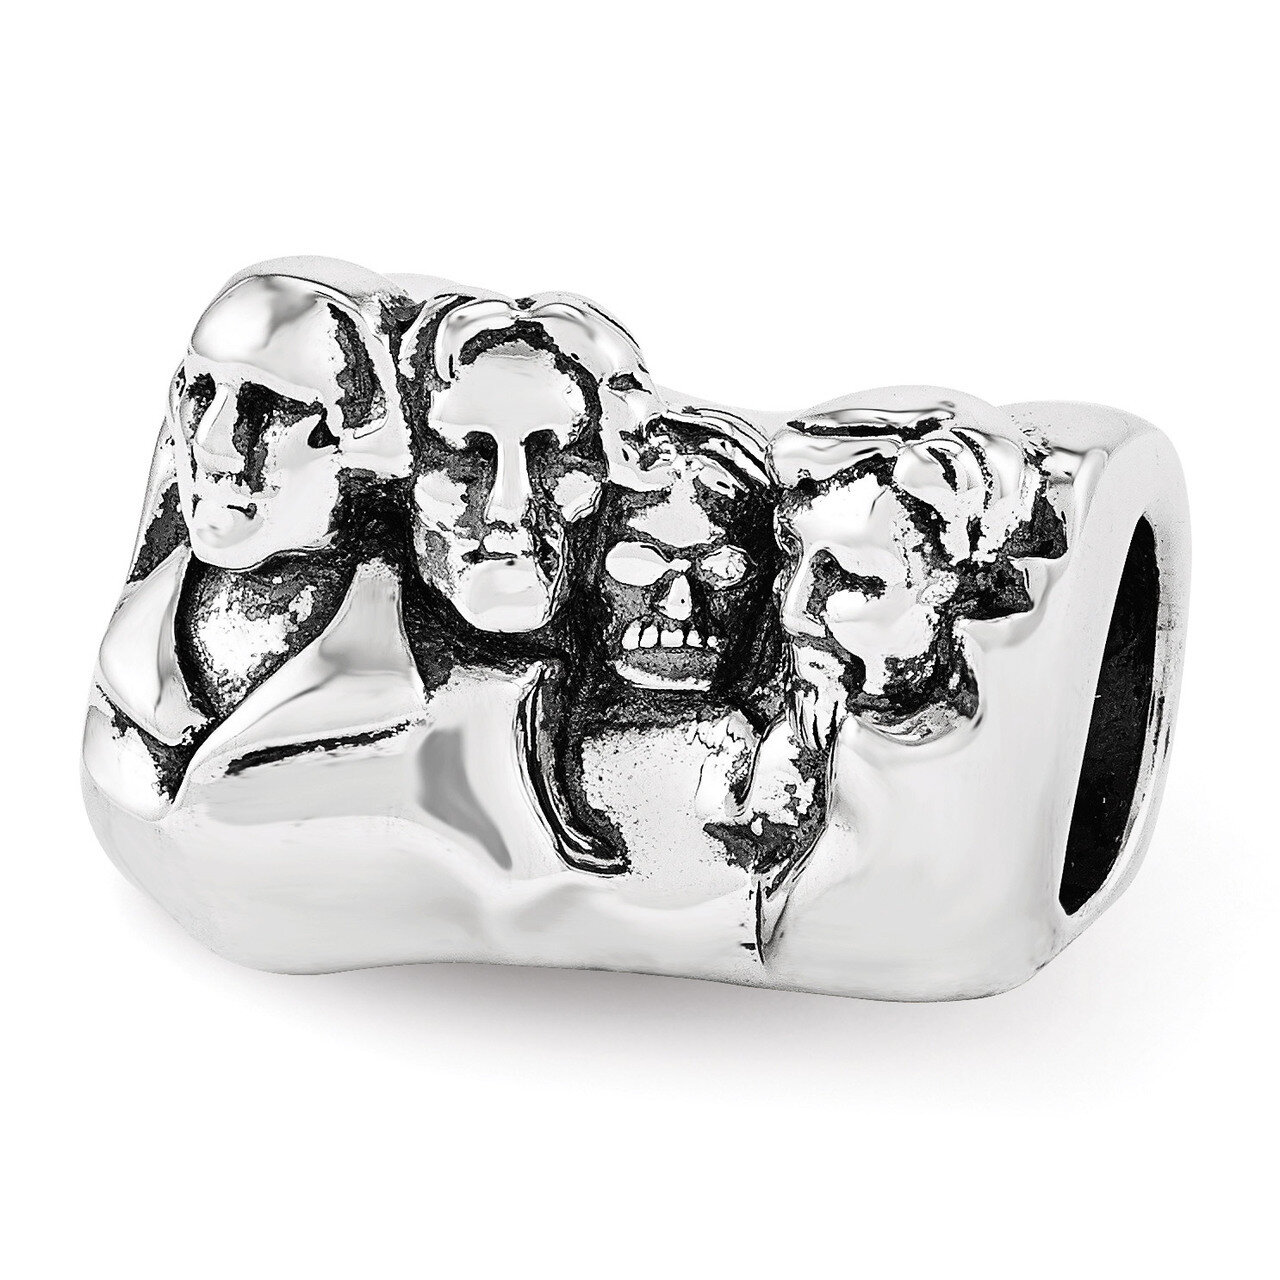 Mount Rushmore Bead - Sterling Silver QRS3428